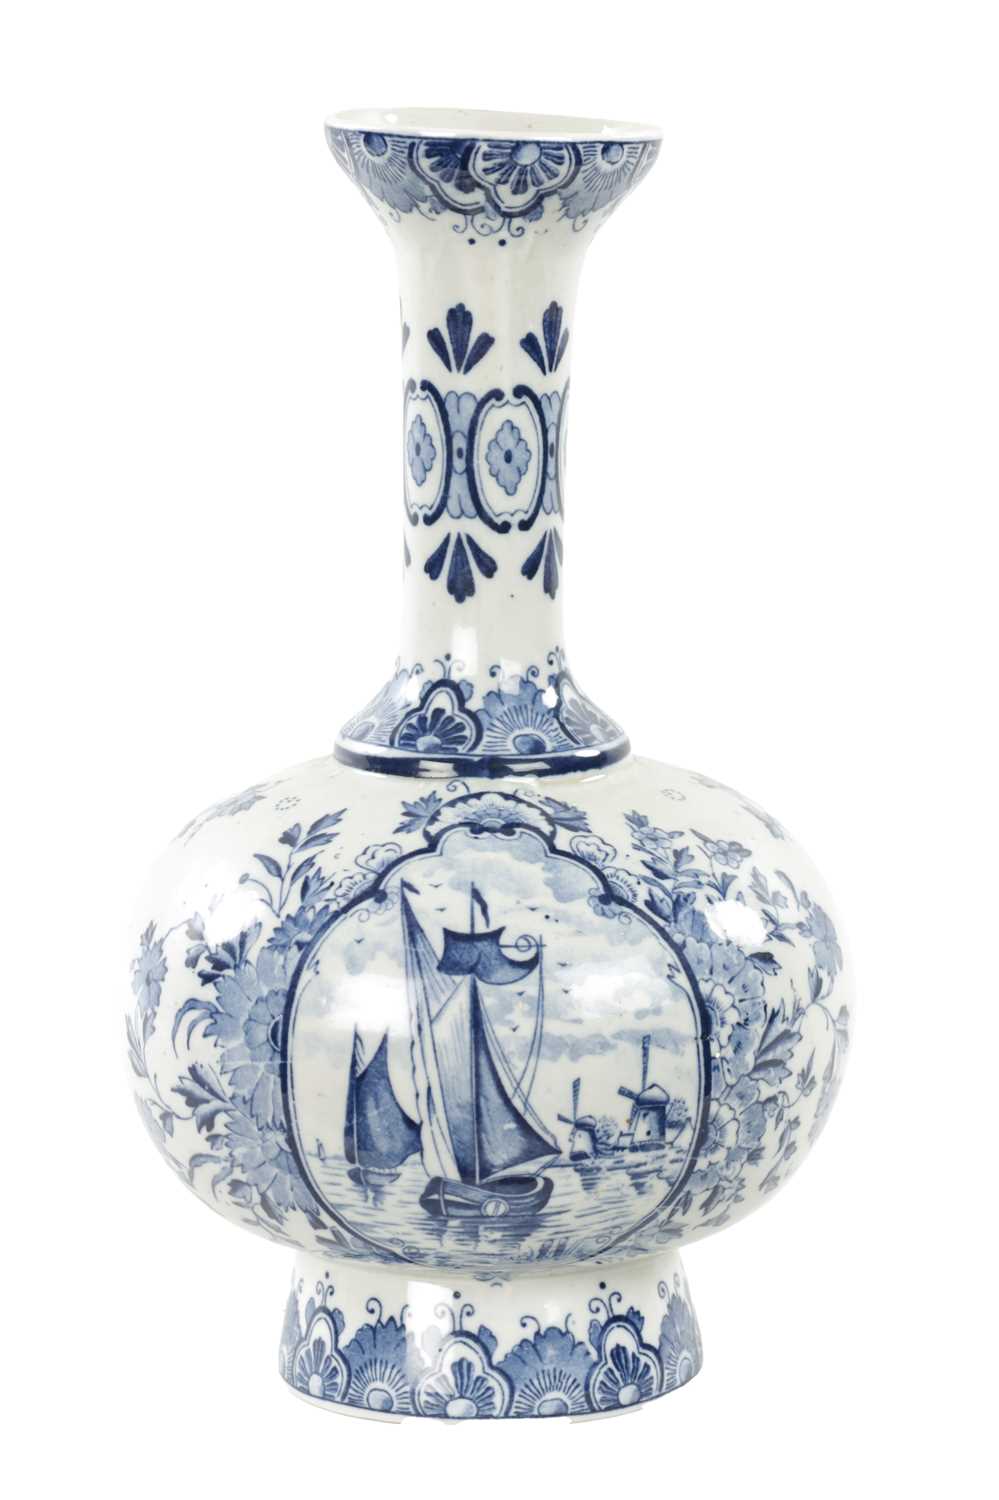 A 19TH CENTURY BLUE AND WHITE DELFT BOTTLE VASE